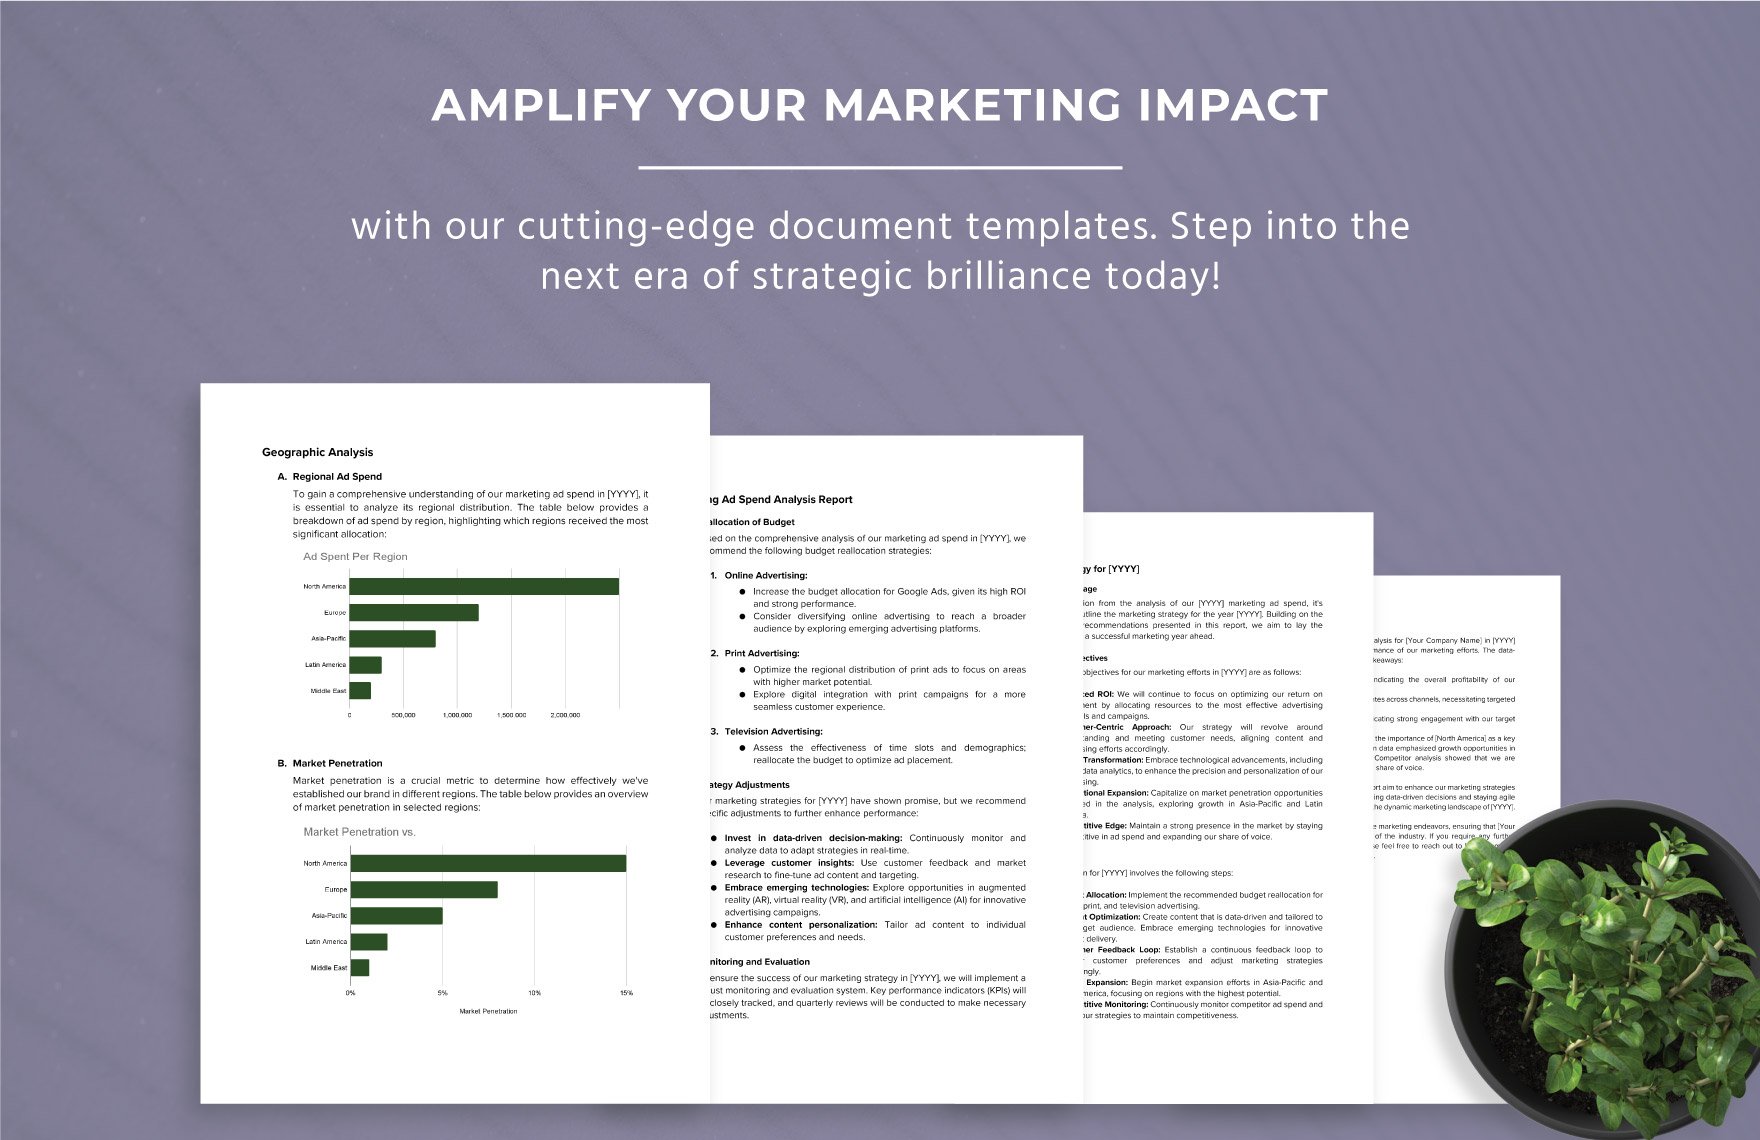 Marketing Ad Spend Analysis Report Template